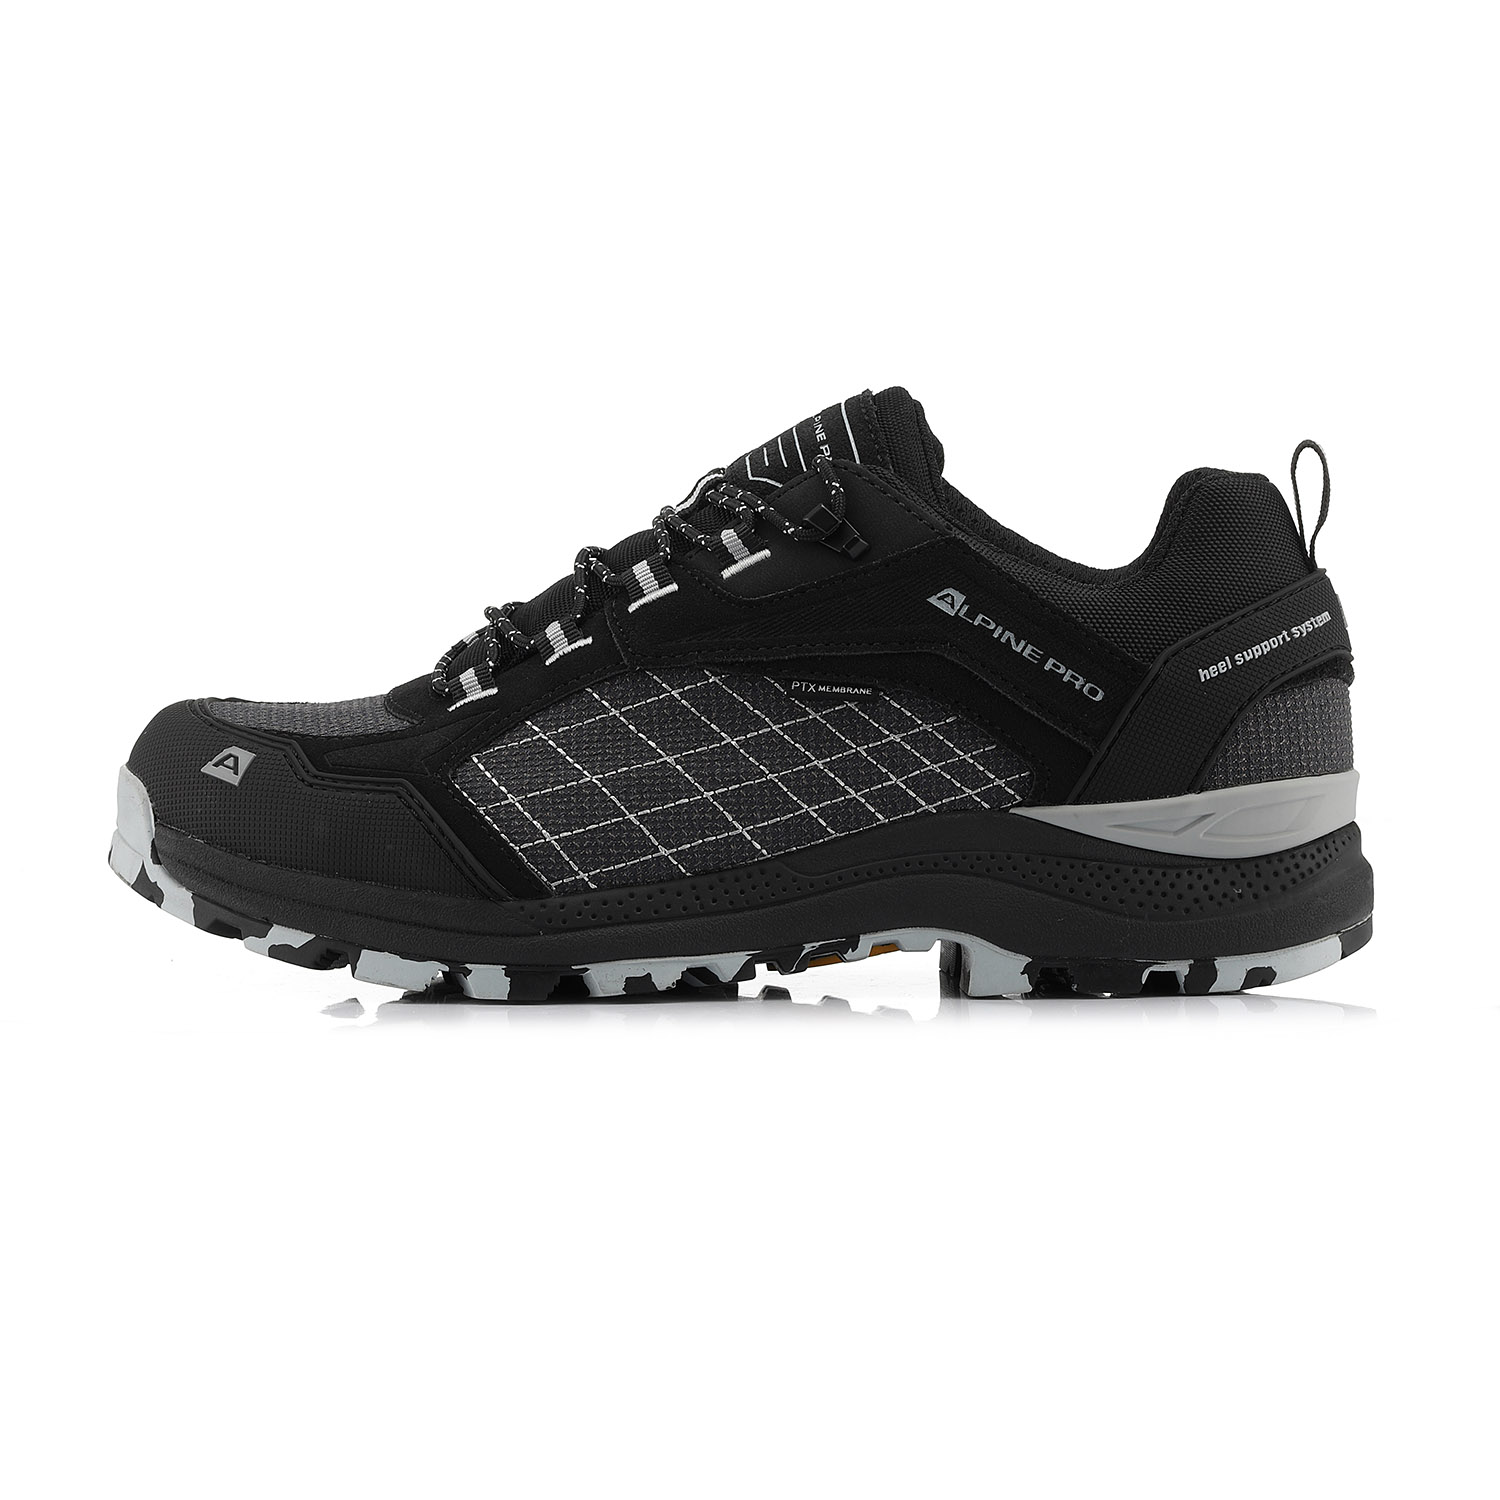 Outdoor shoes with ptx membrane ALPINE PRO LOPRE black